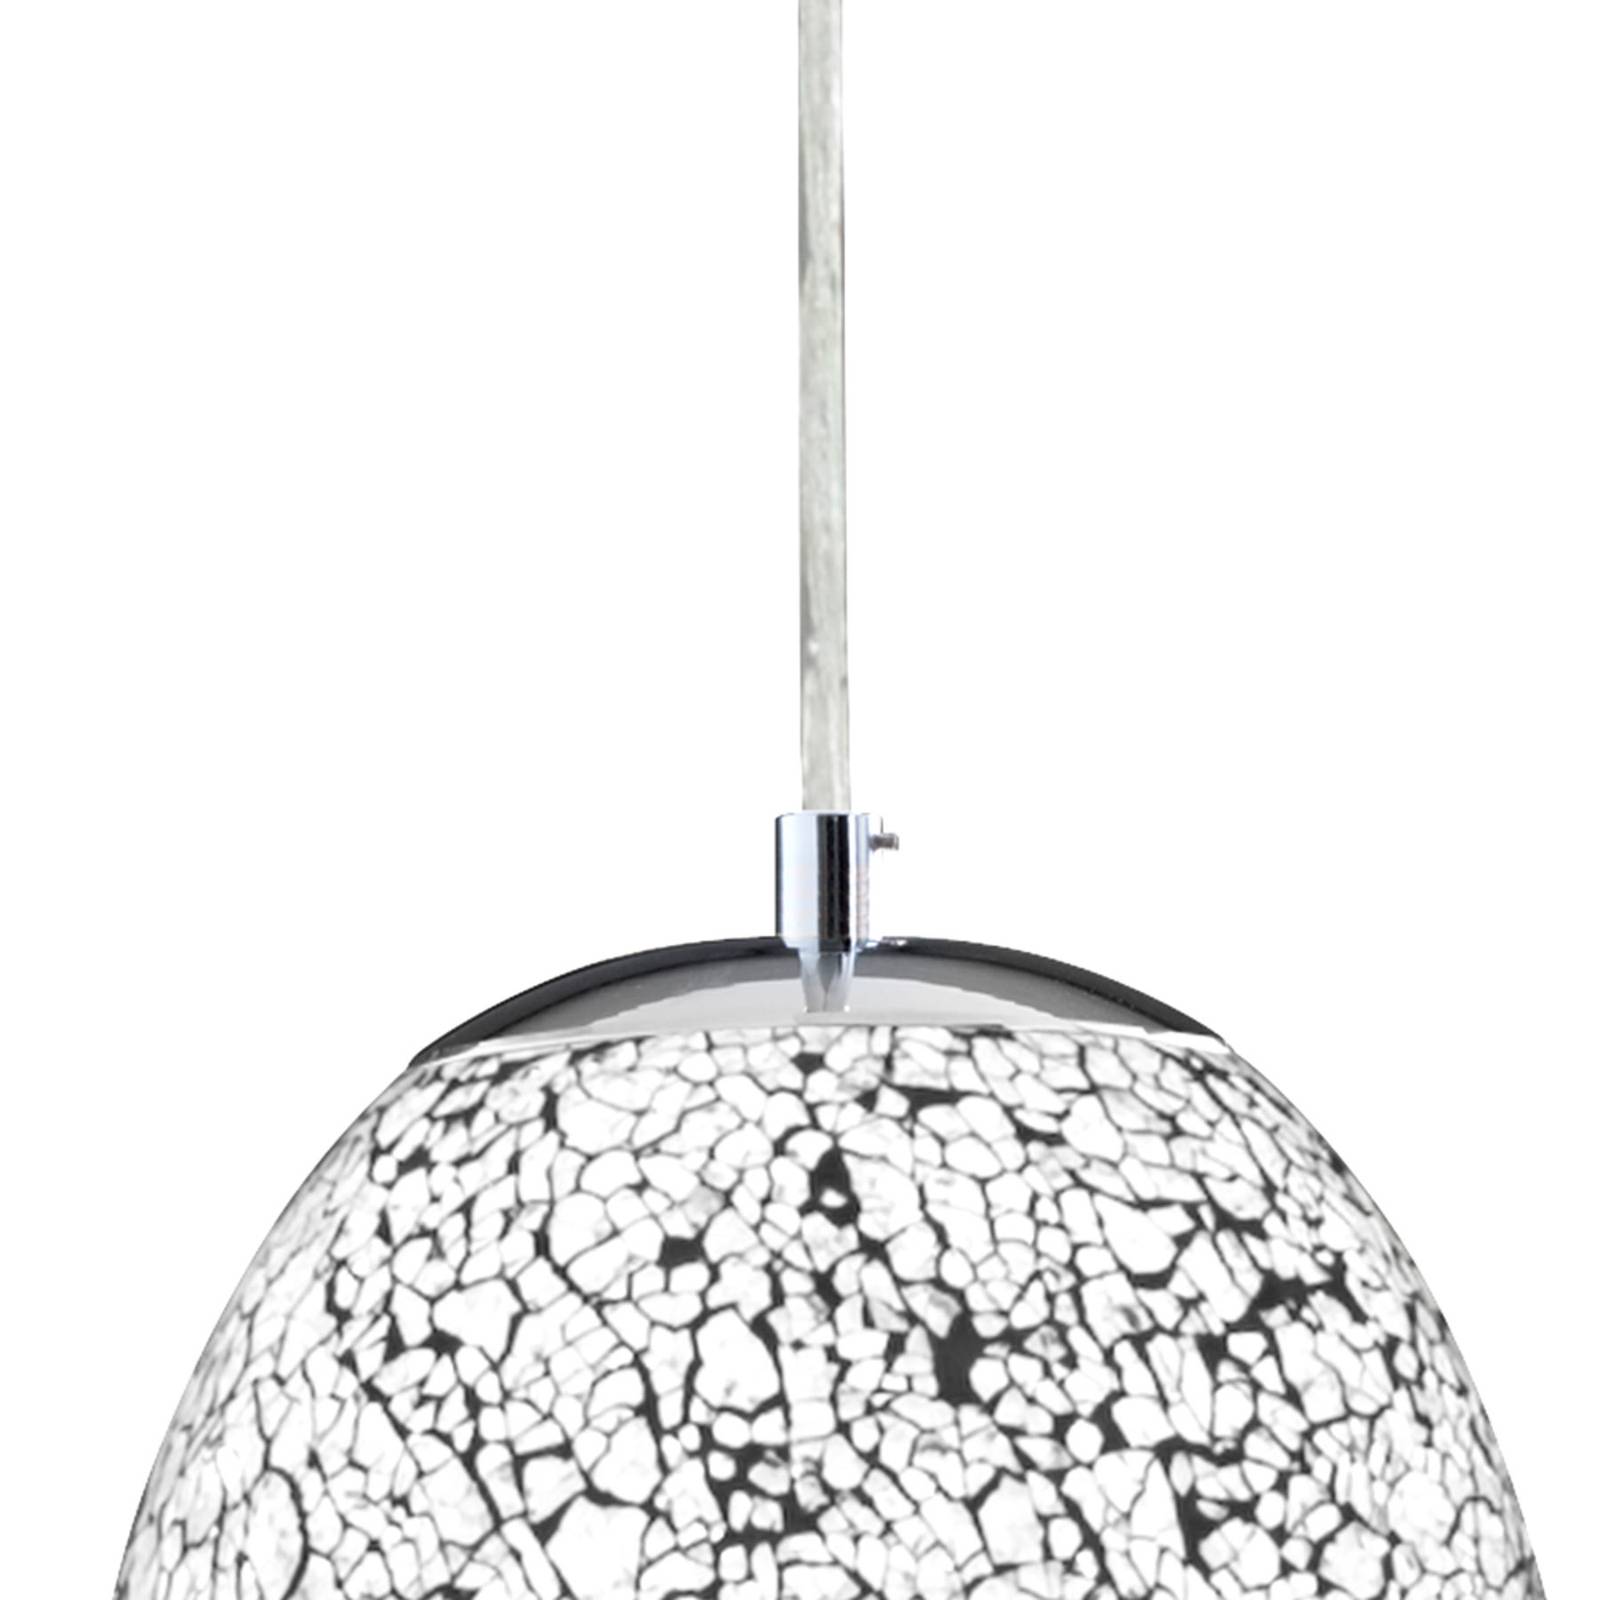  Searchlight Searchlight Chrome White Hanging Light Crackle 